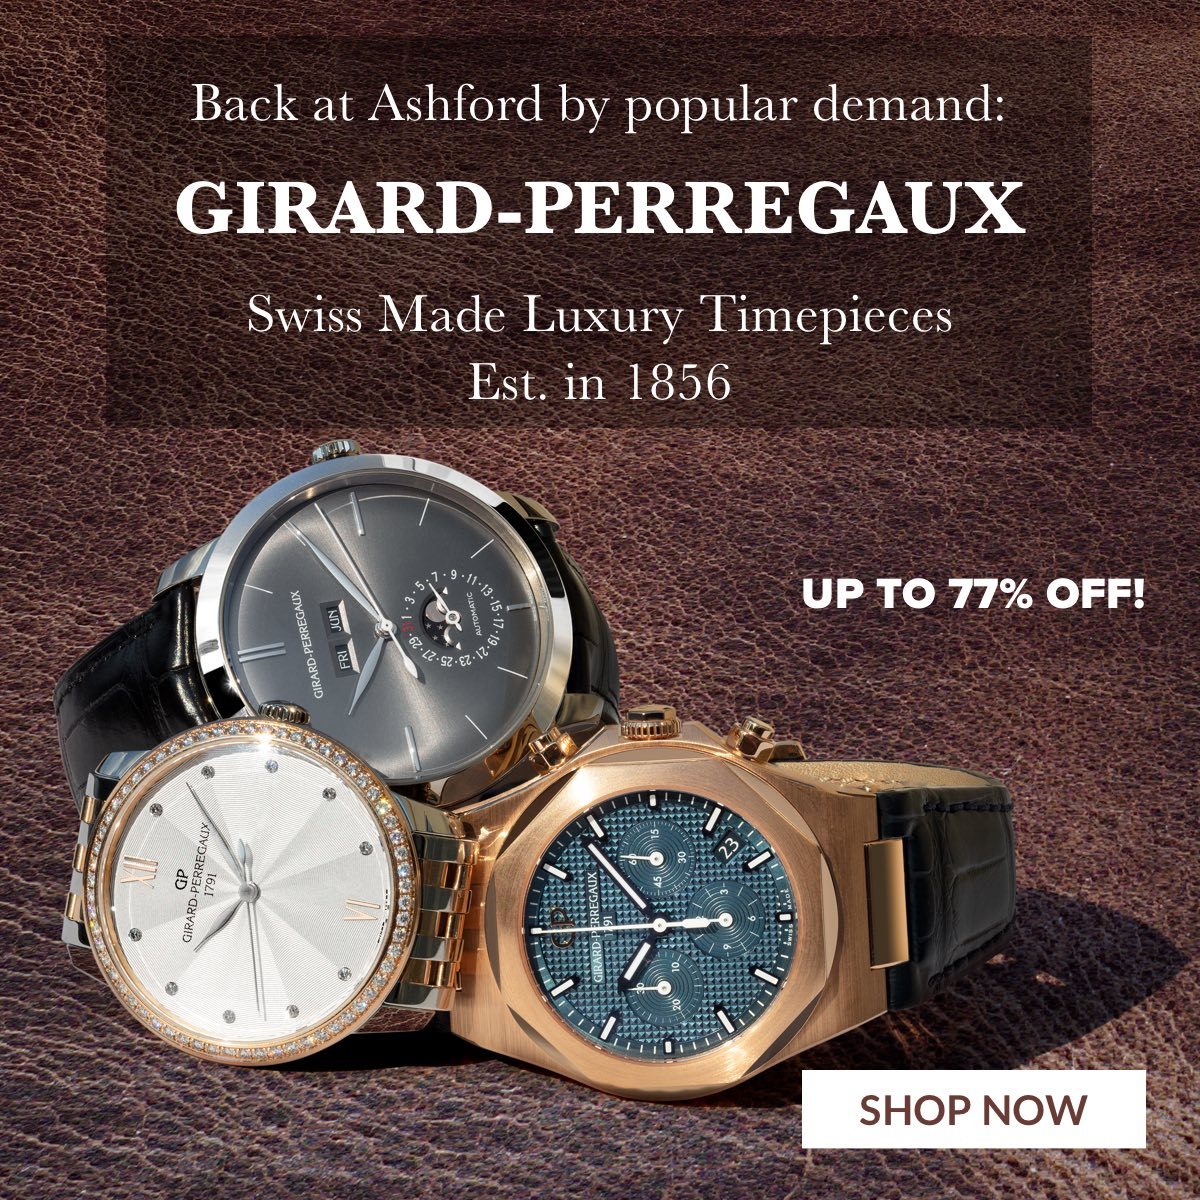 Back at Ashford by popular demand: Girard Perregaux Swiss Made Luxury Timepieces Est. in 1856